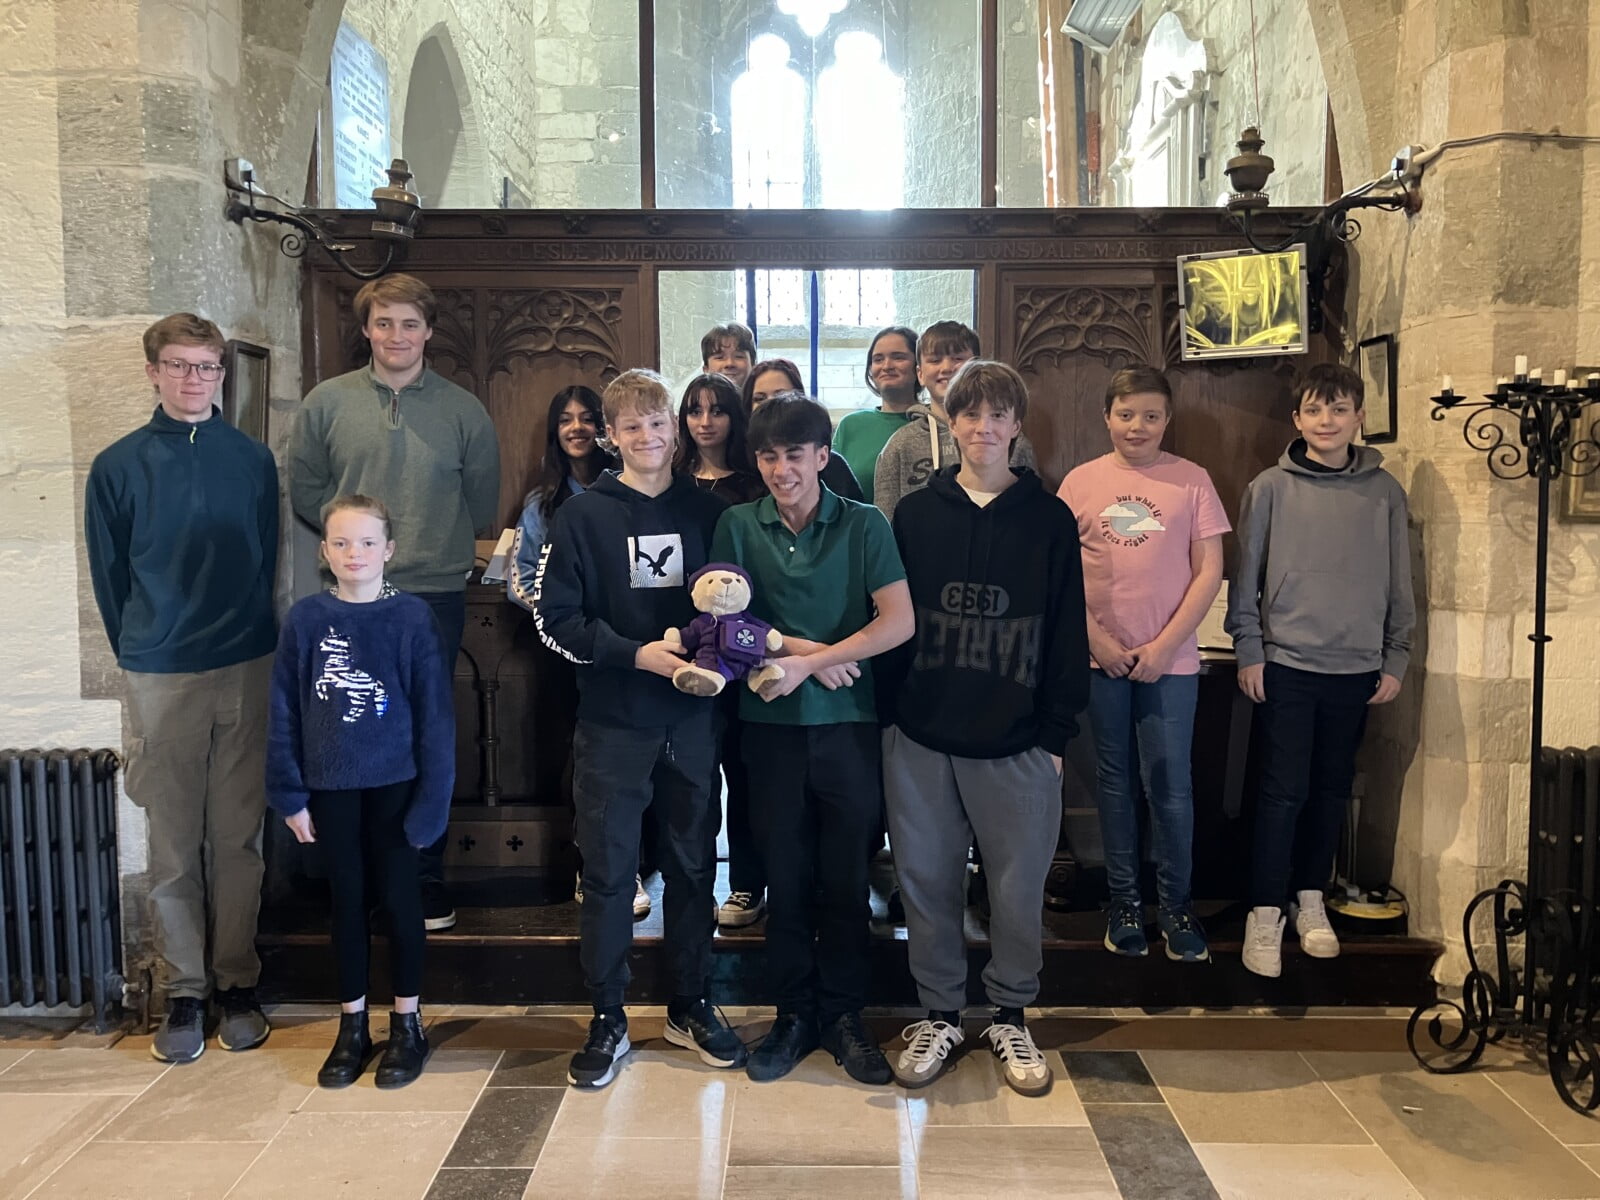 The assembled Young Ringers group at Shroton